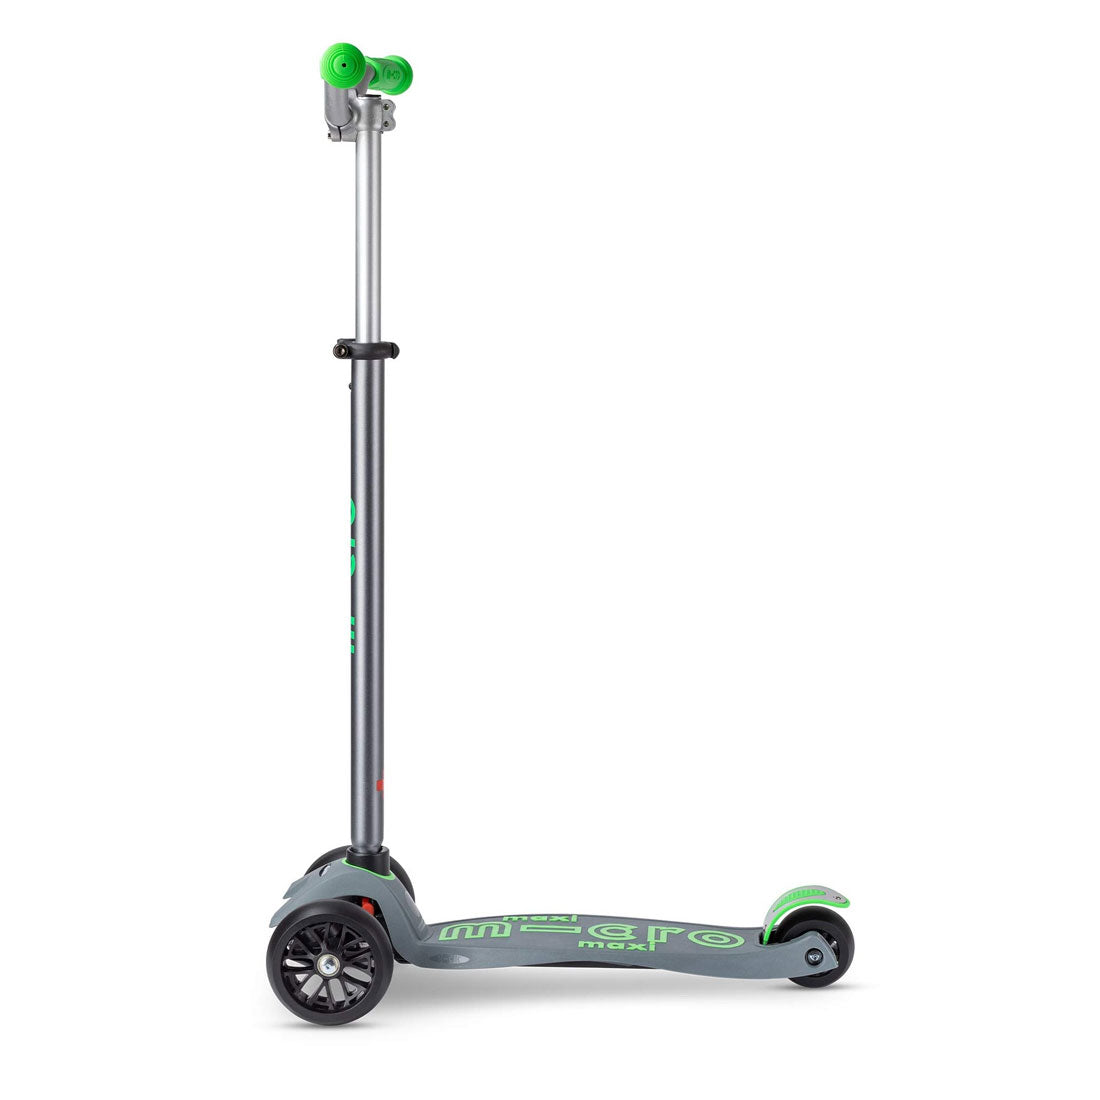 Micro Maxi Deluxe PRO Scooter - Grey/Green Scooter Completes Rec